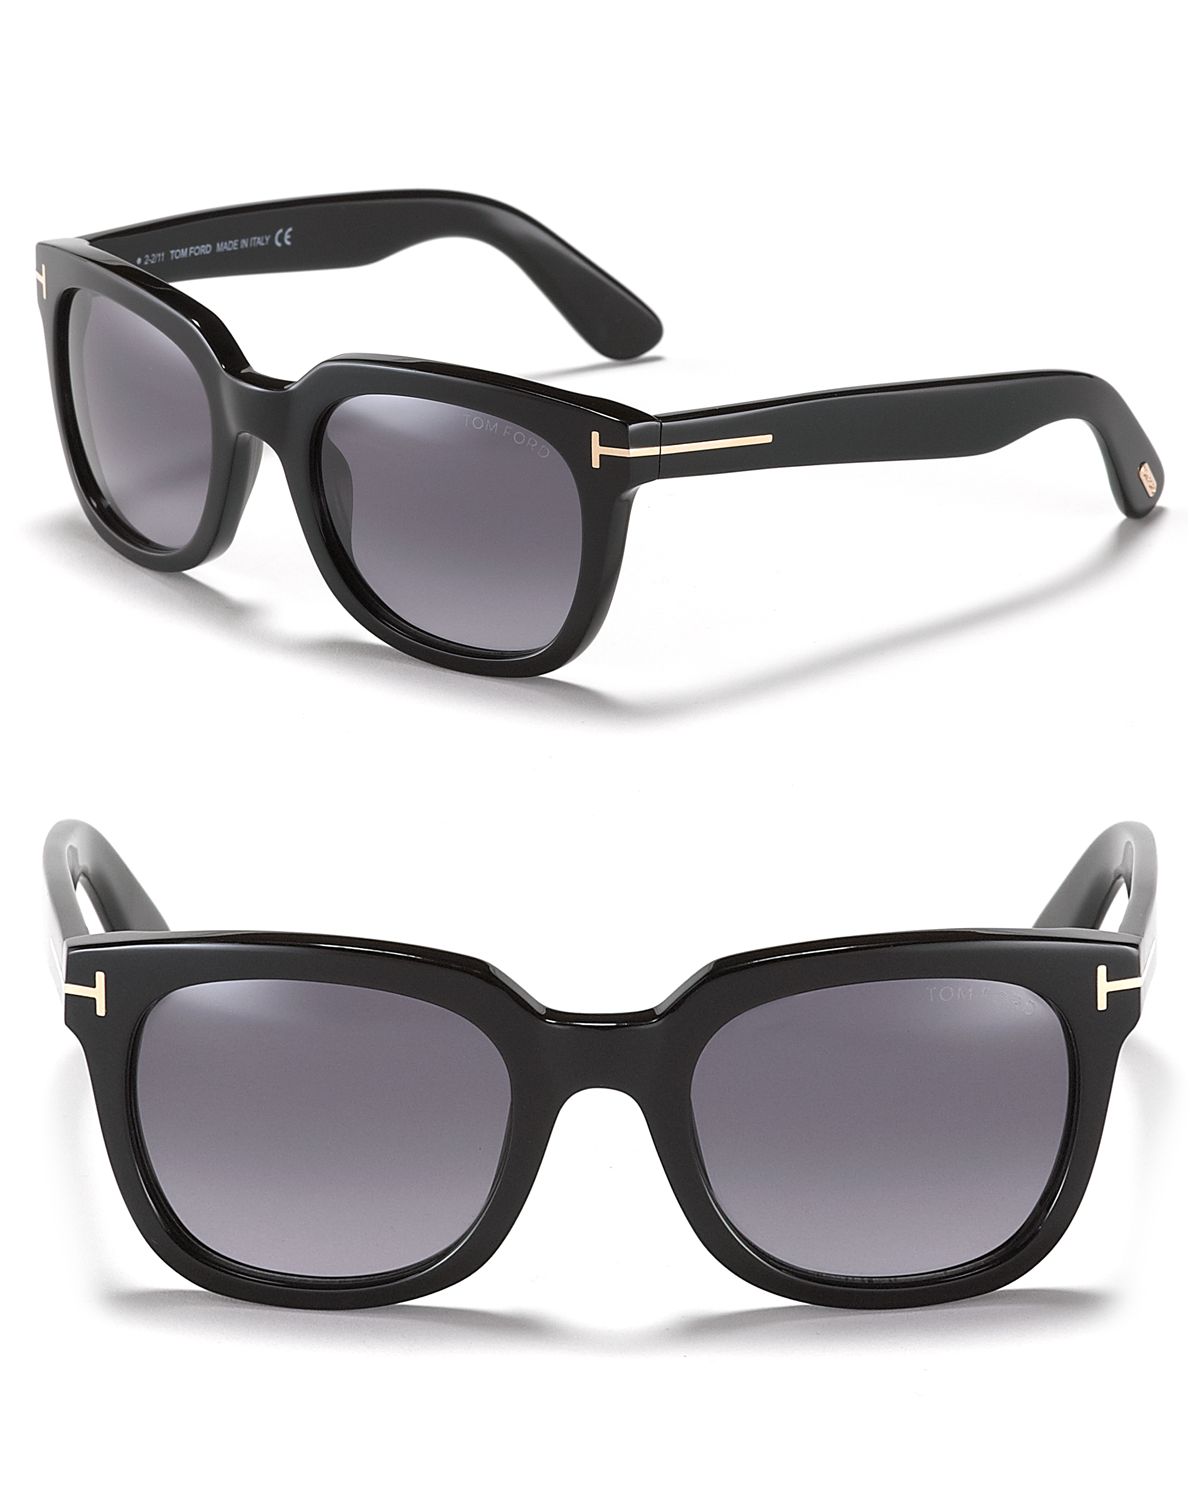 Tom Ford Campbell Sunglasses in Black for Men - Lyst